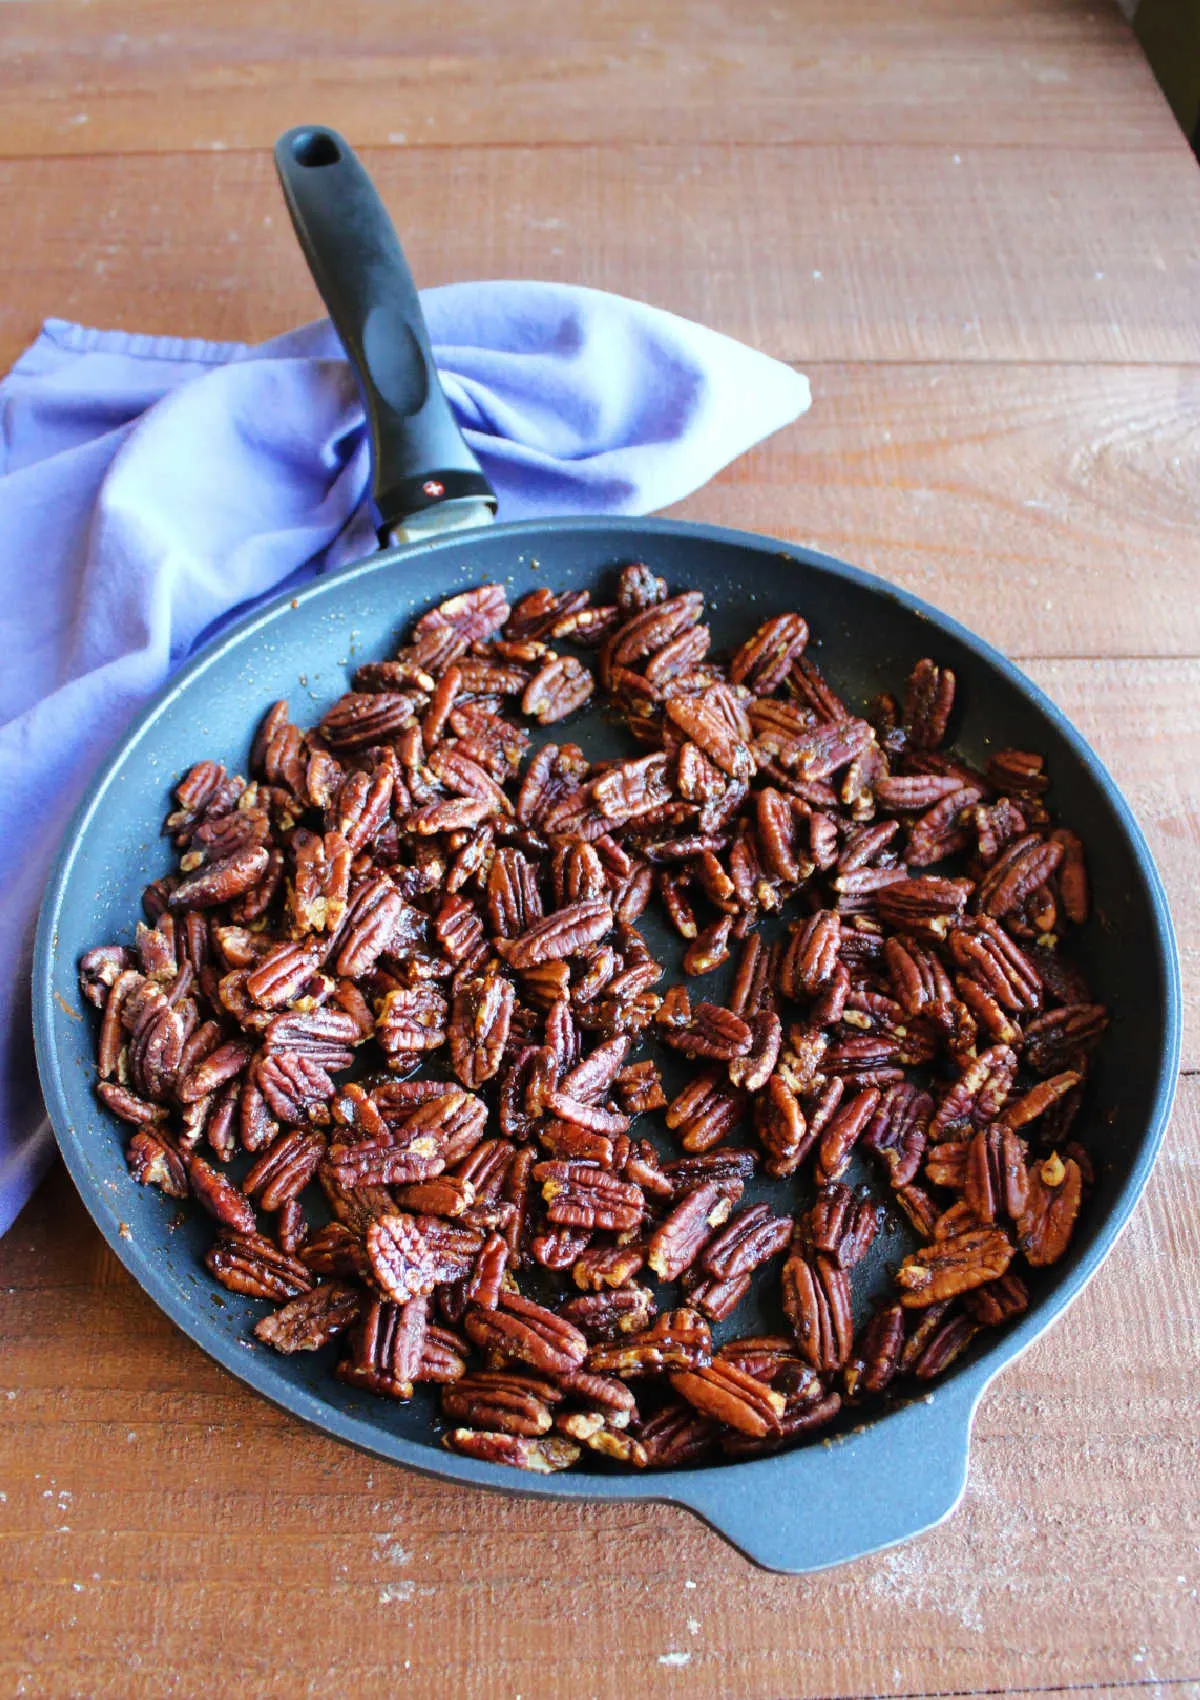 Large skillet filled with spiced pecans, fresh from the oven.